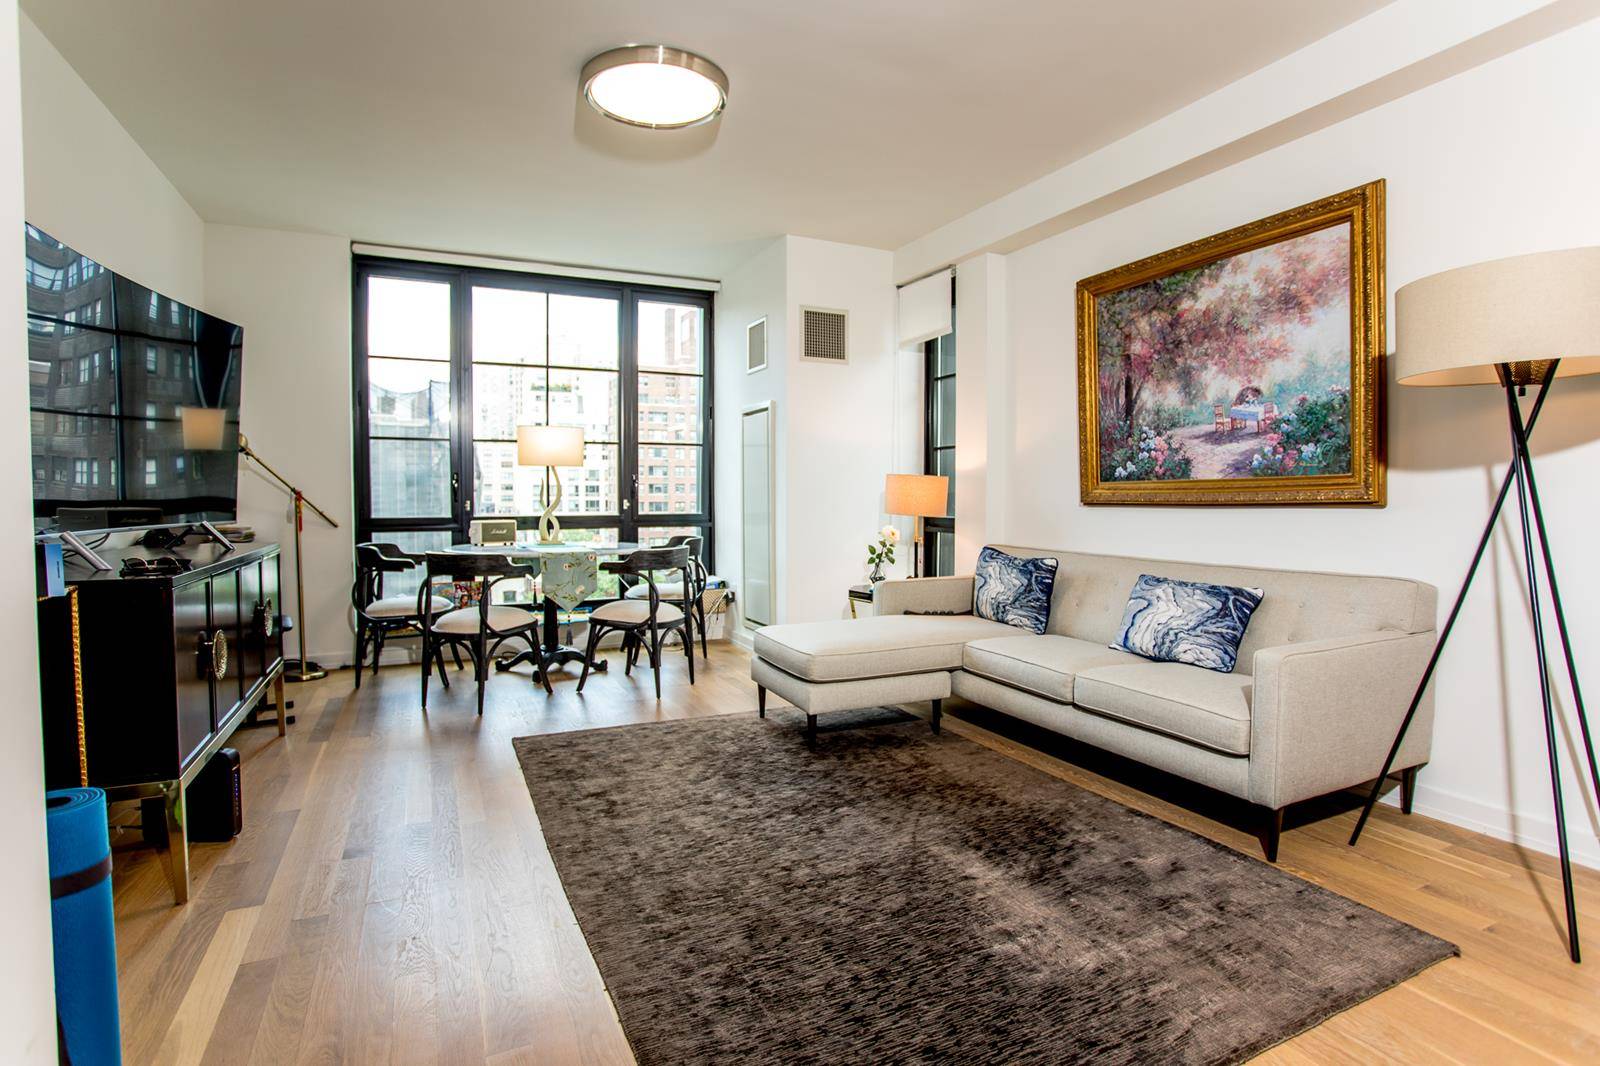 Apartment 9B is a beautiful two bedroom, two bathroom apartment with panoramic floor to ceiling, industrial style, square casement windows framing iconic, sweeping Manhattan views.